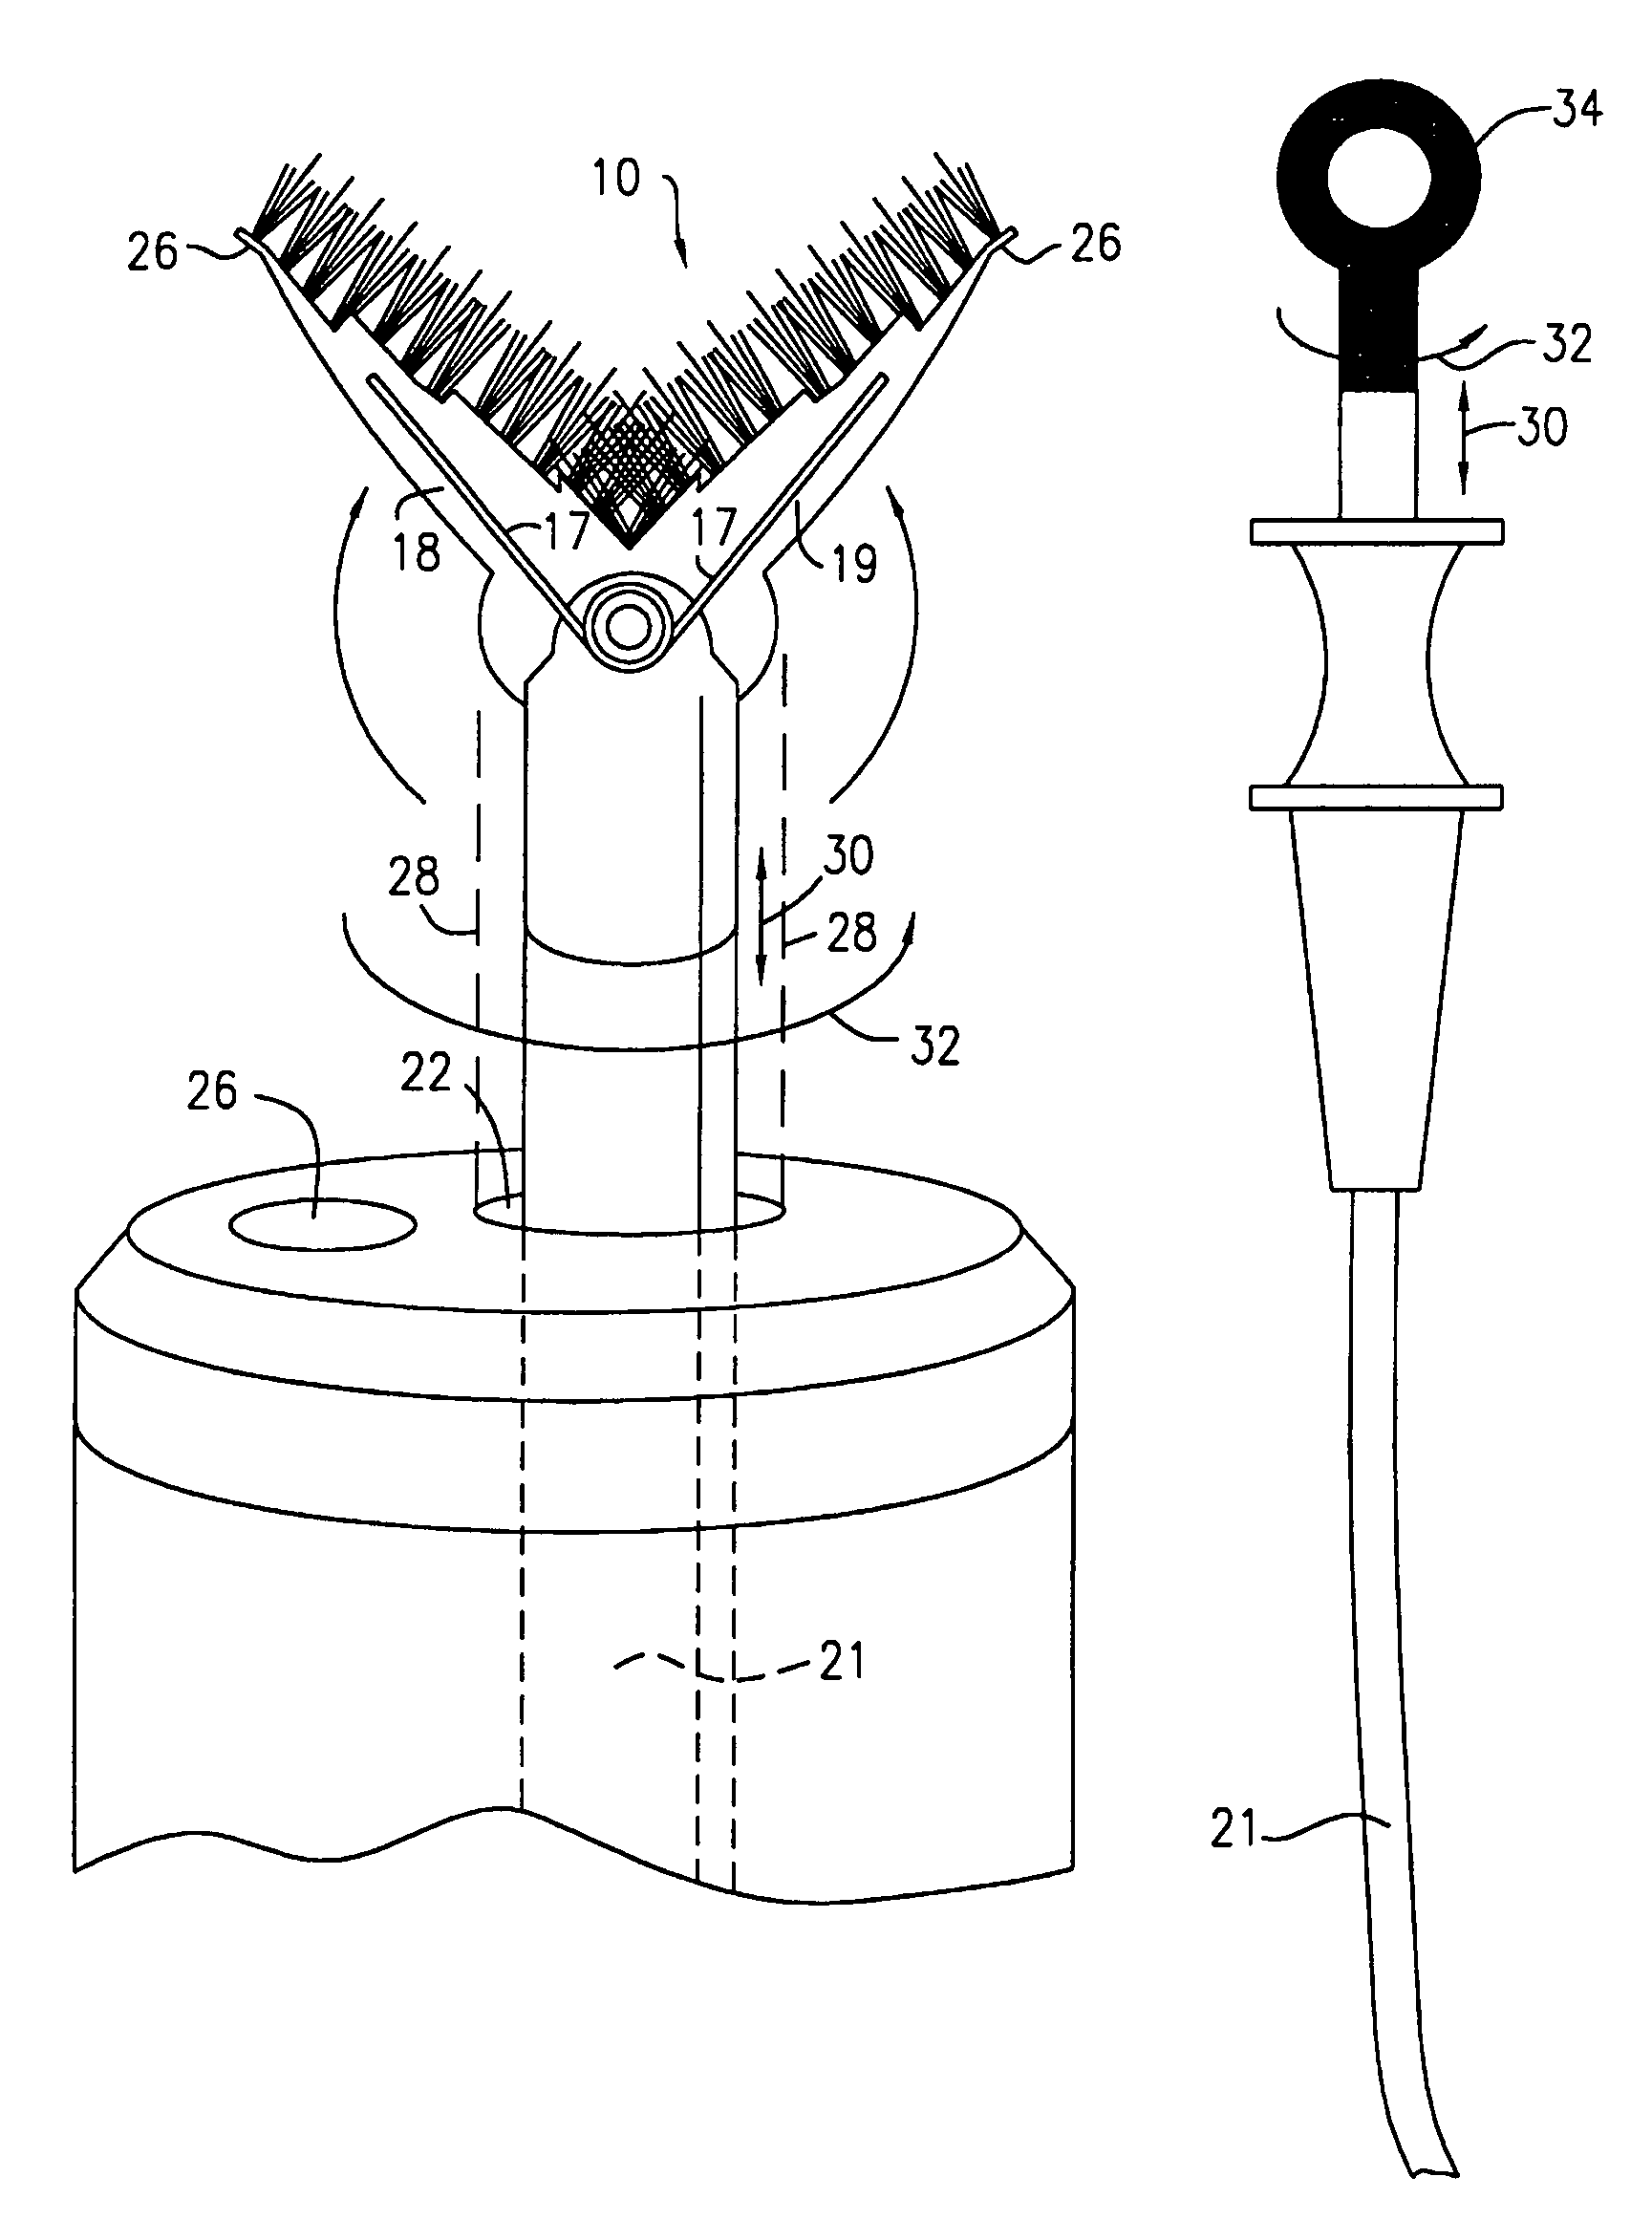 Retractable brush for use with endoscope for brush biopsy